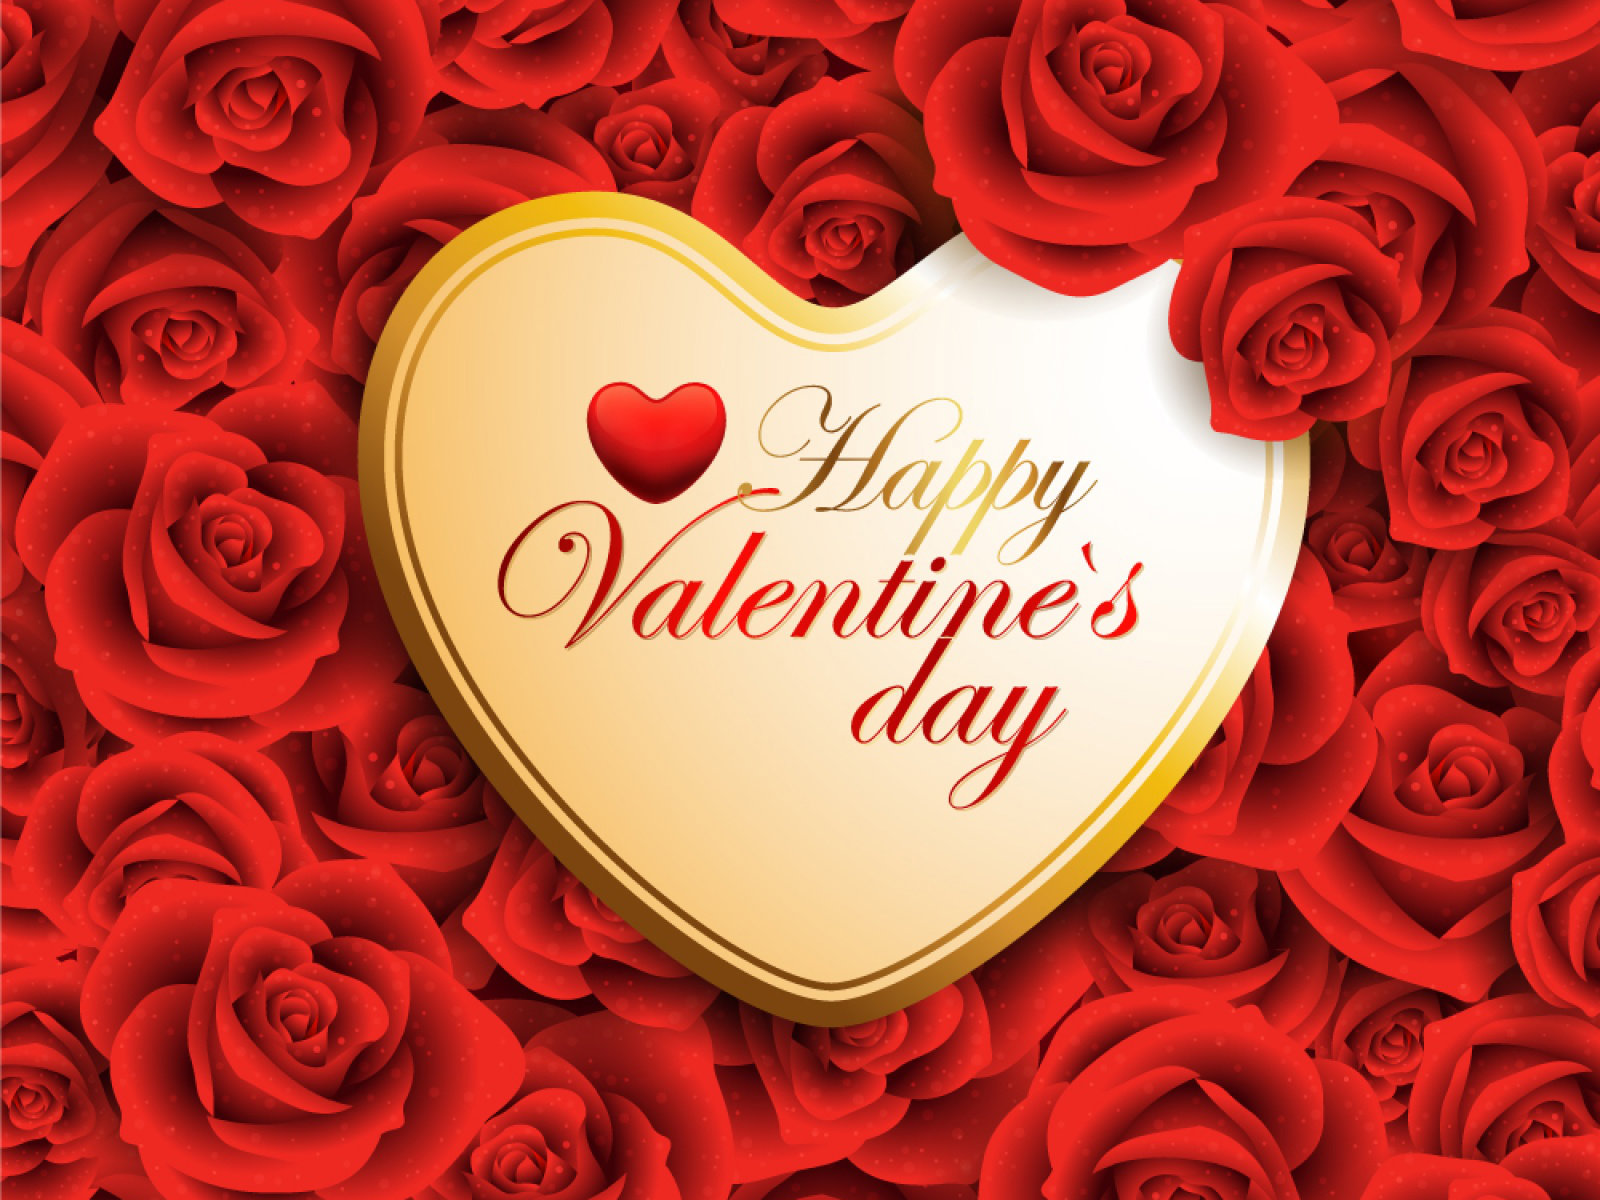 Happy Valentines Day Image HD Wallpaper For